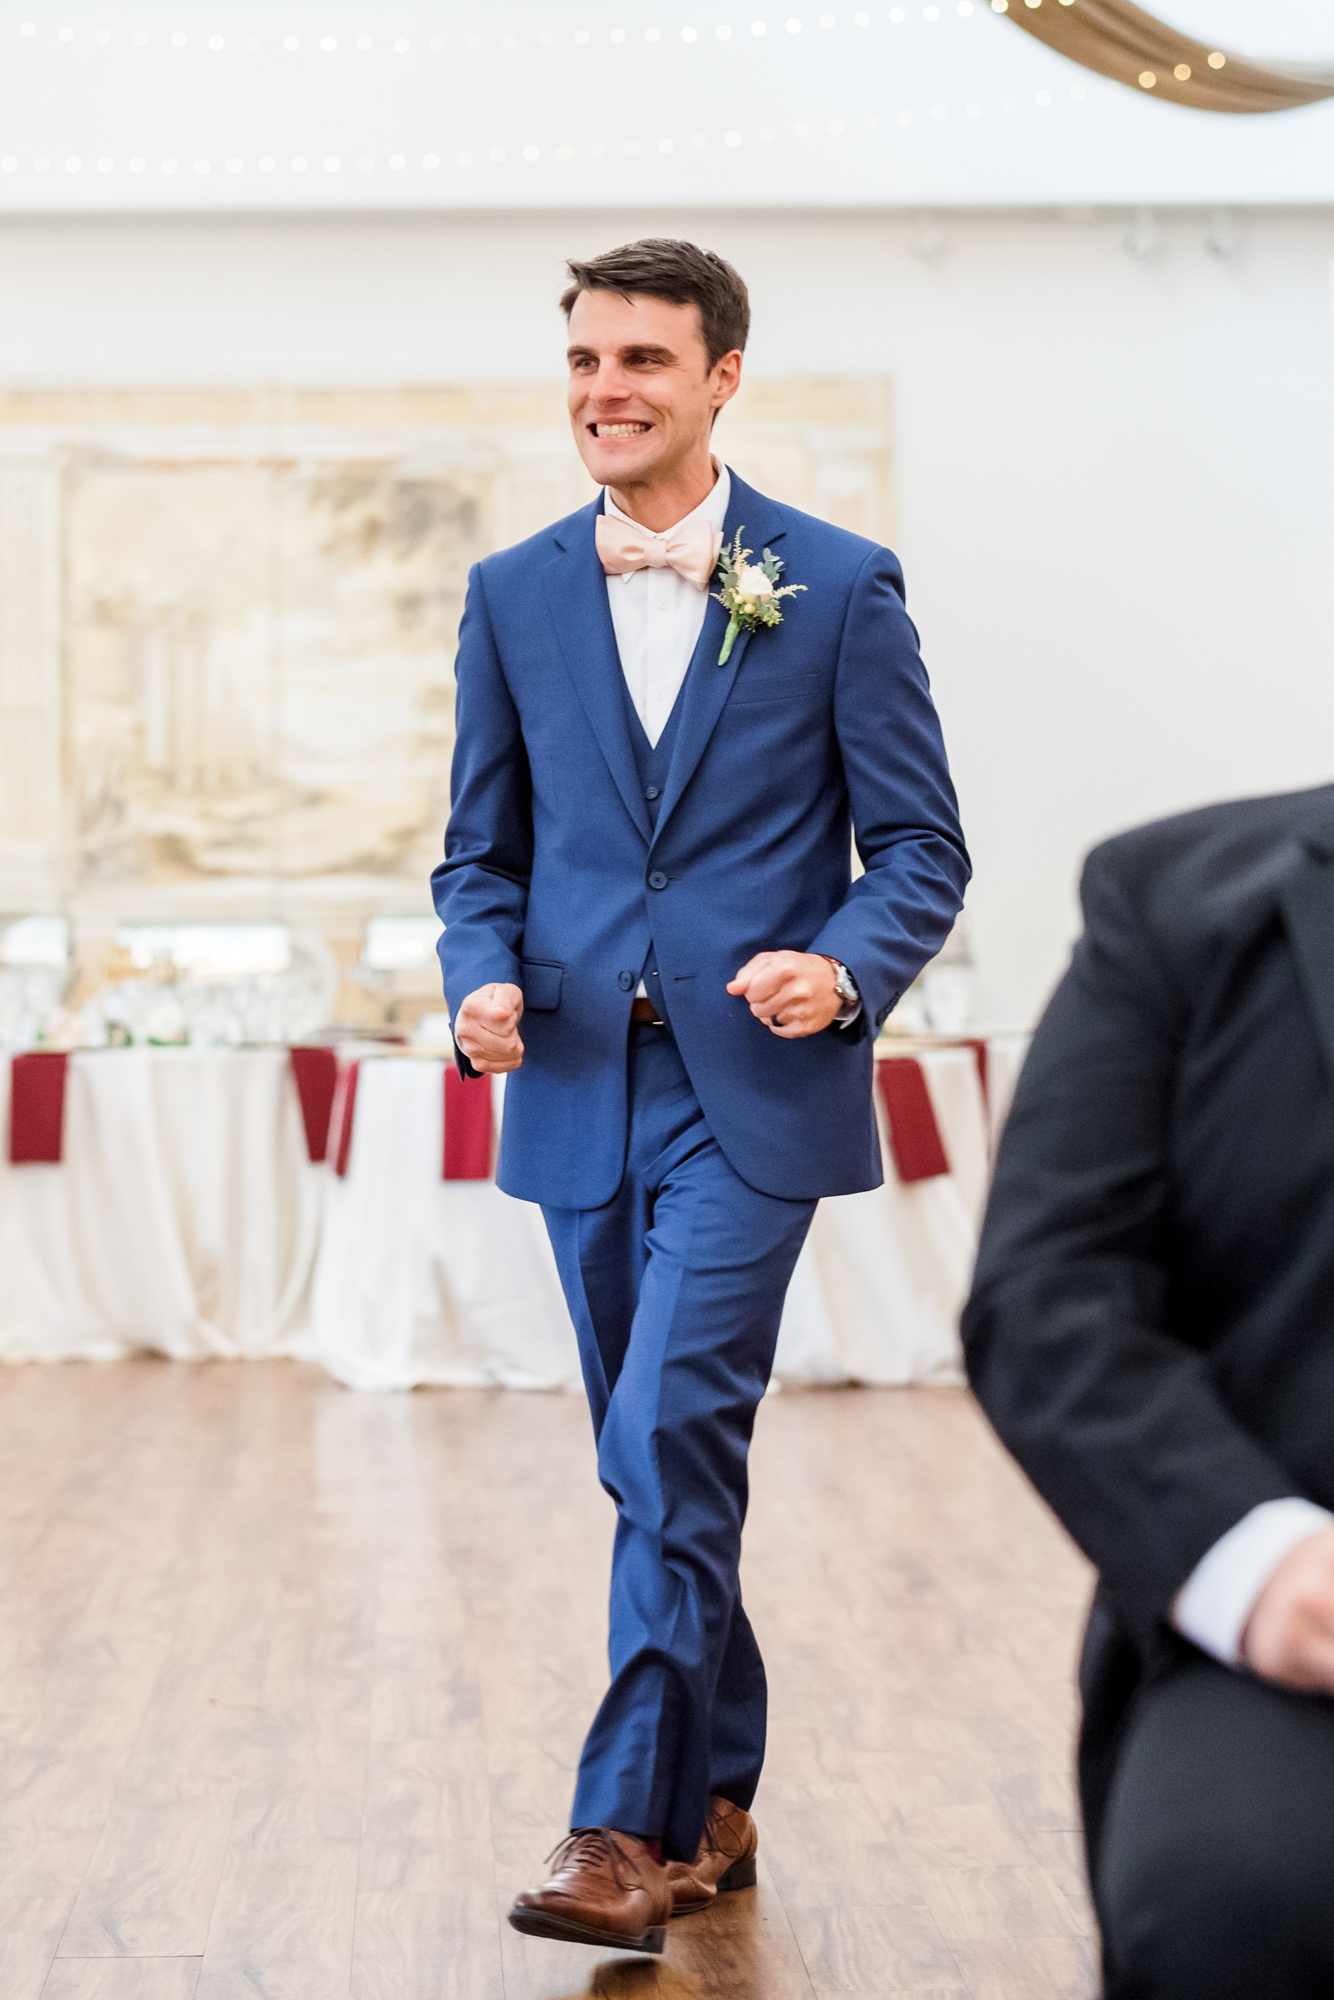 groom walking down aisle with hands in fists